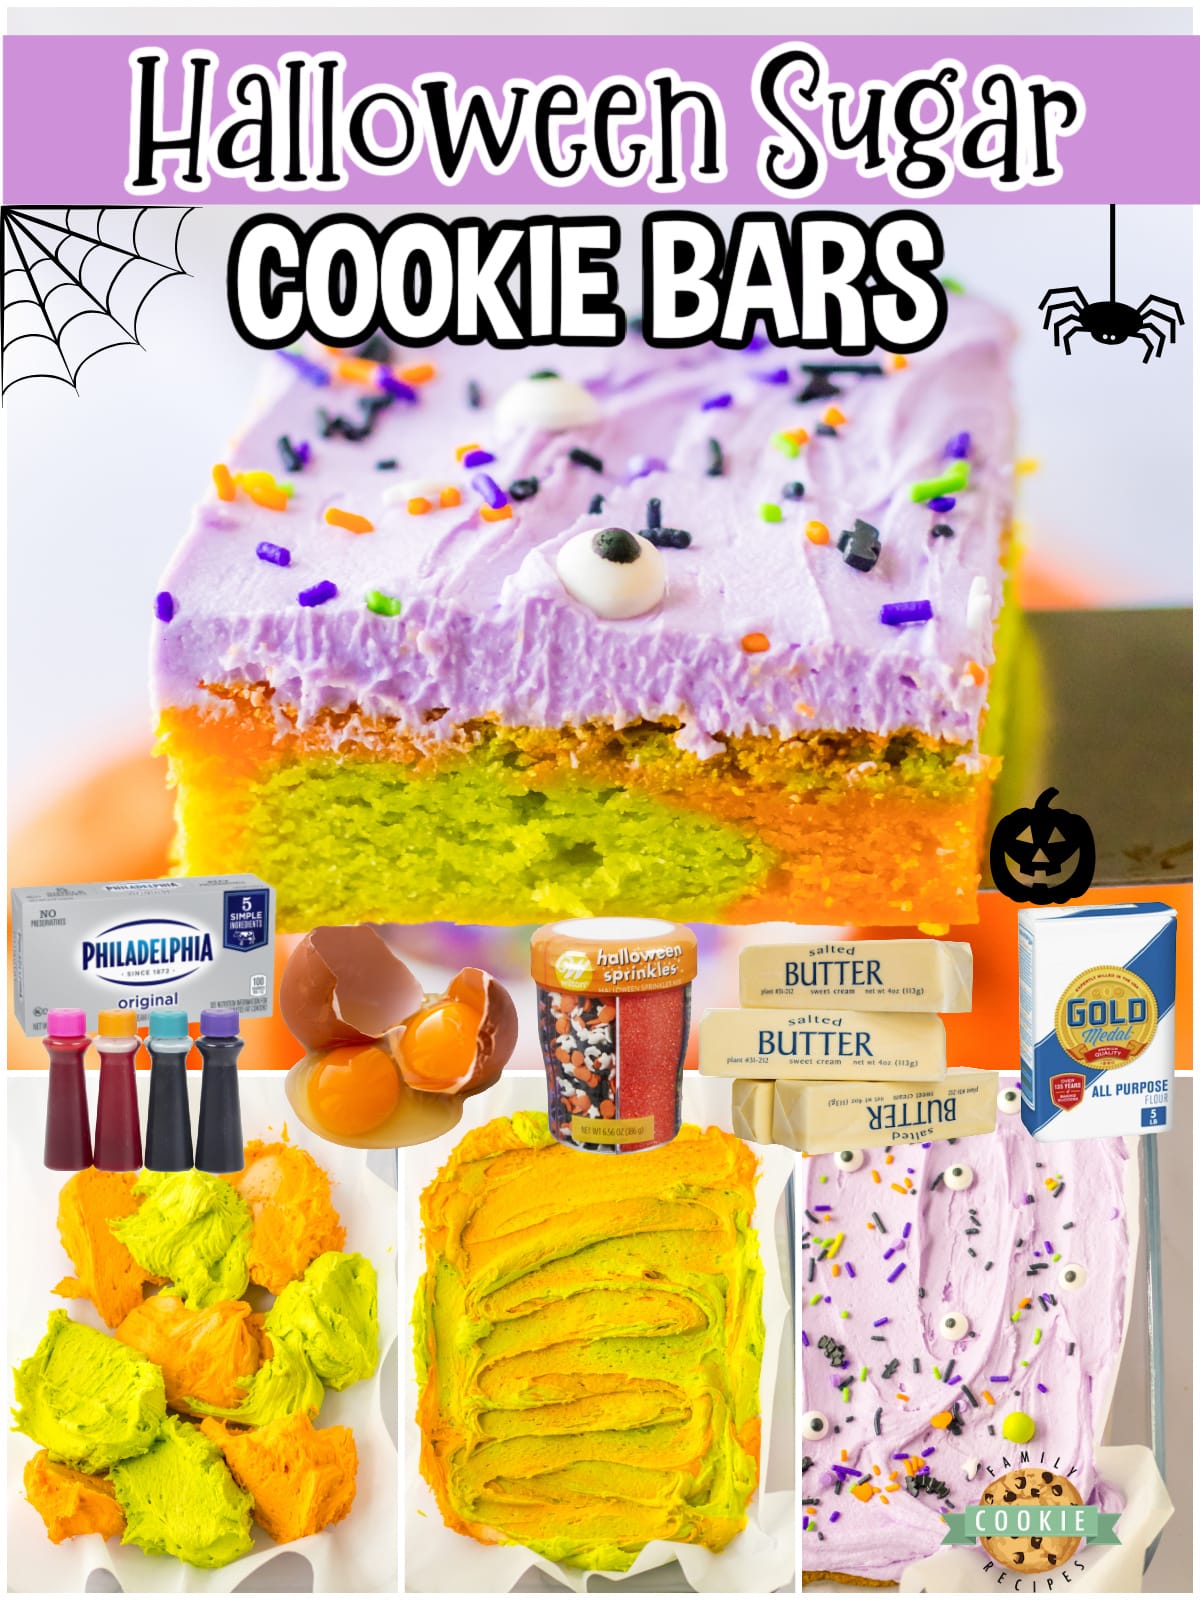 Halloween Sugar Cookie Bars are chewy, marbled cookie bars topped with purple buttercream frosting & spooky sprinkles! A festive treat perfect for Halloween get togethers!